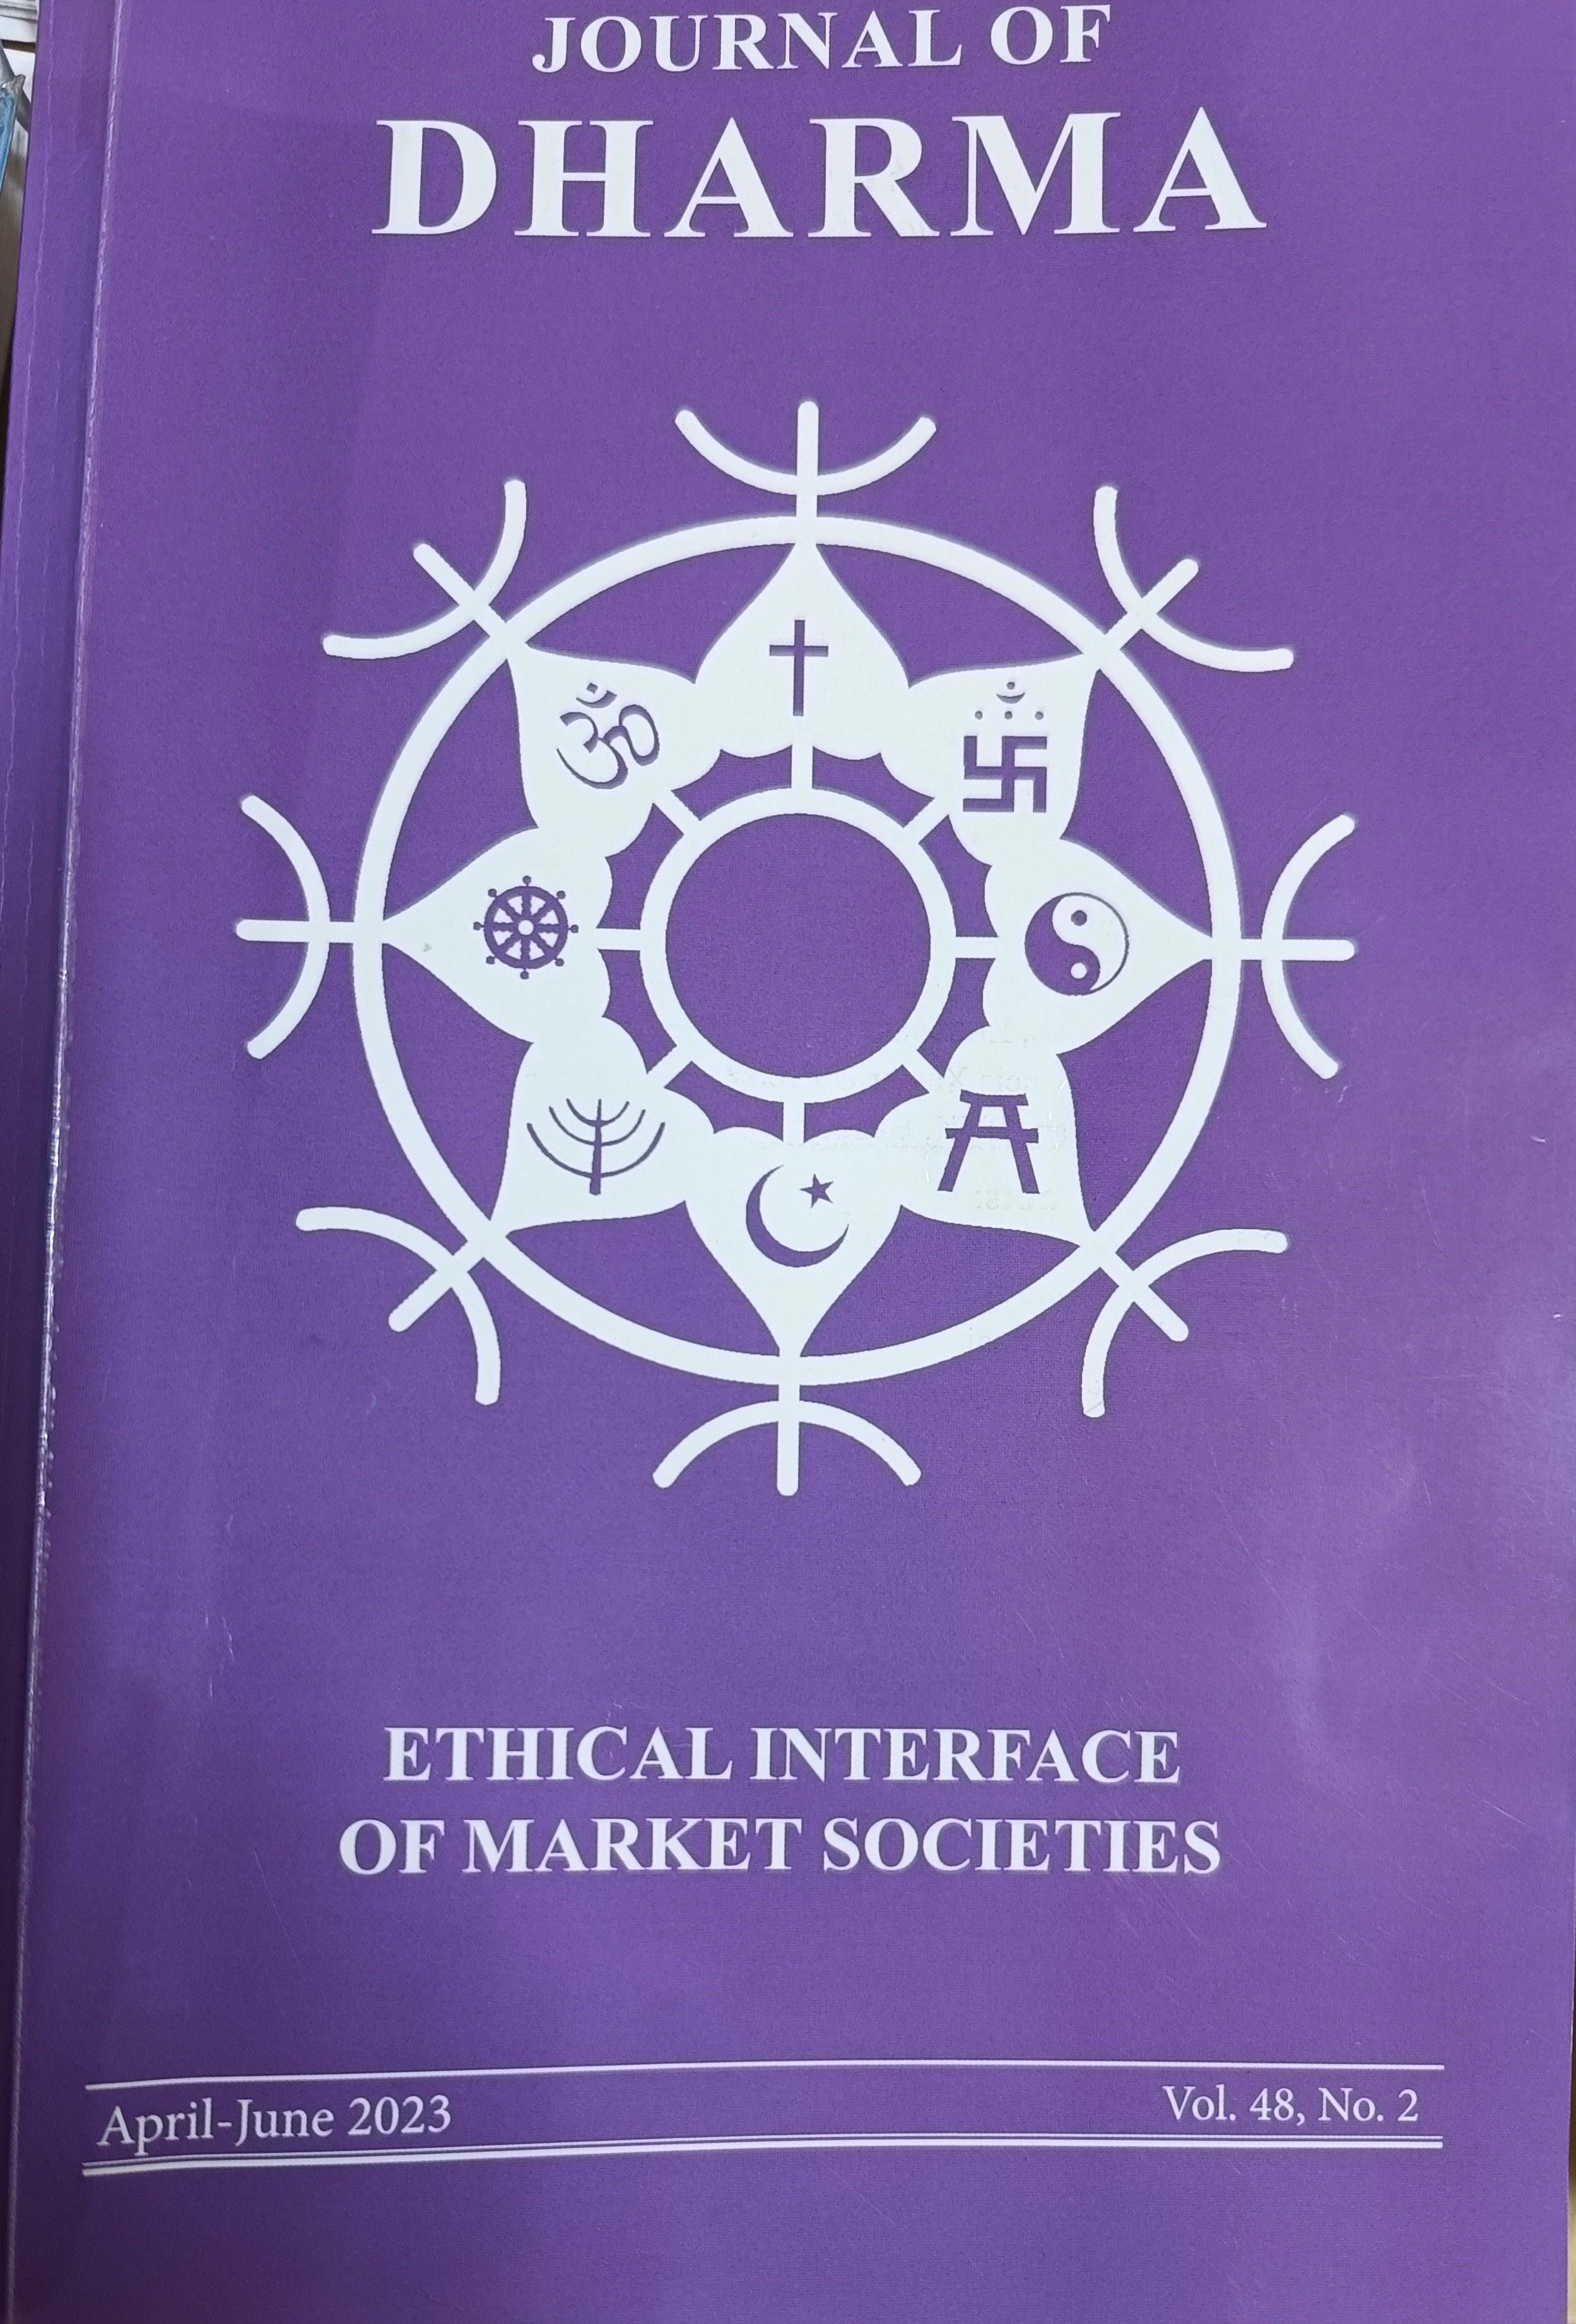 					View Vol. 48 No. 02 (2023): Ethical Interface of Market Societies
				